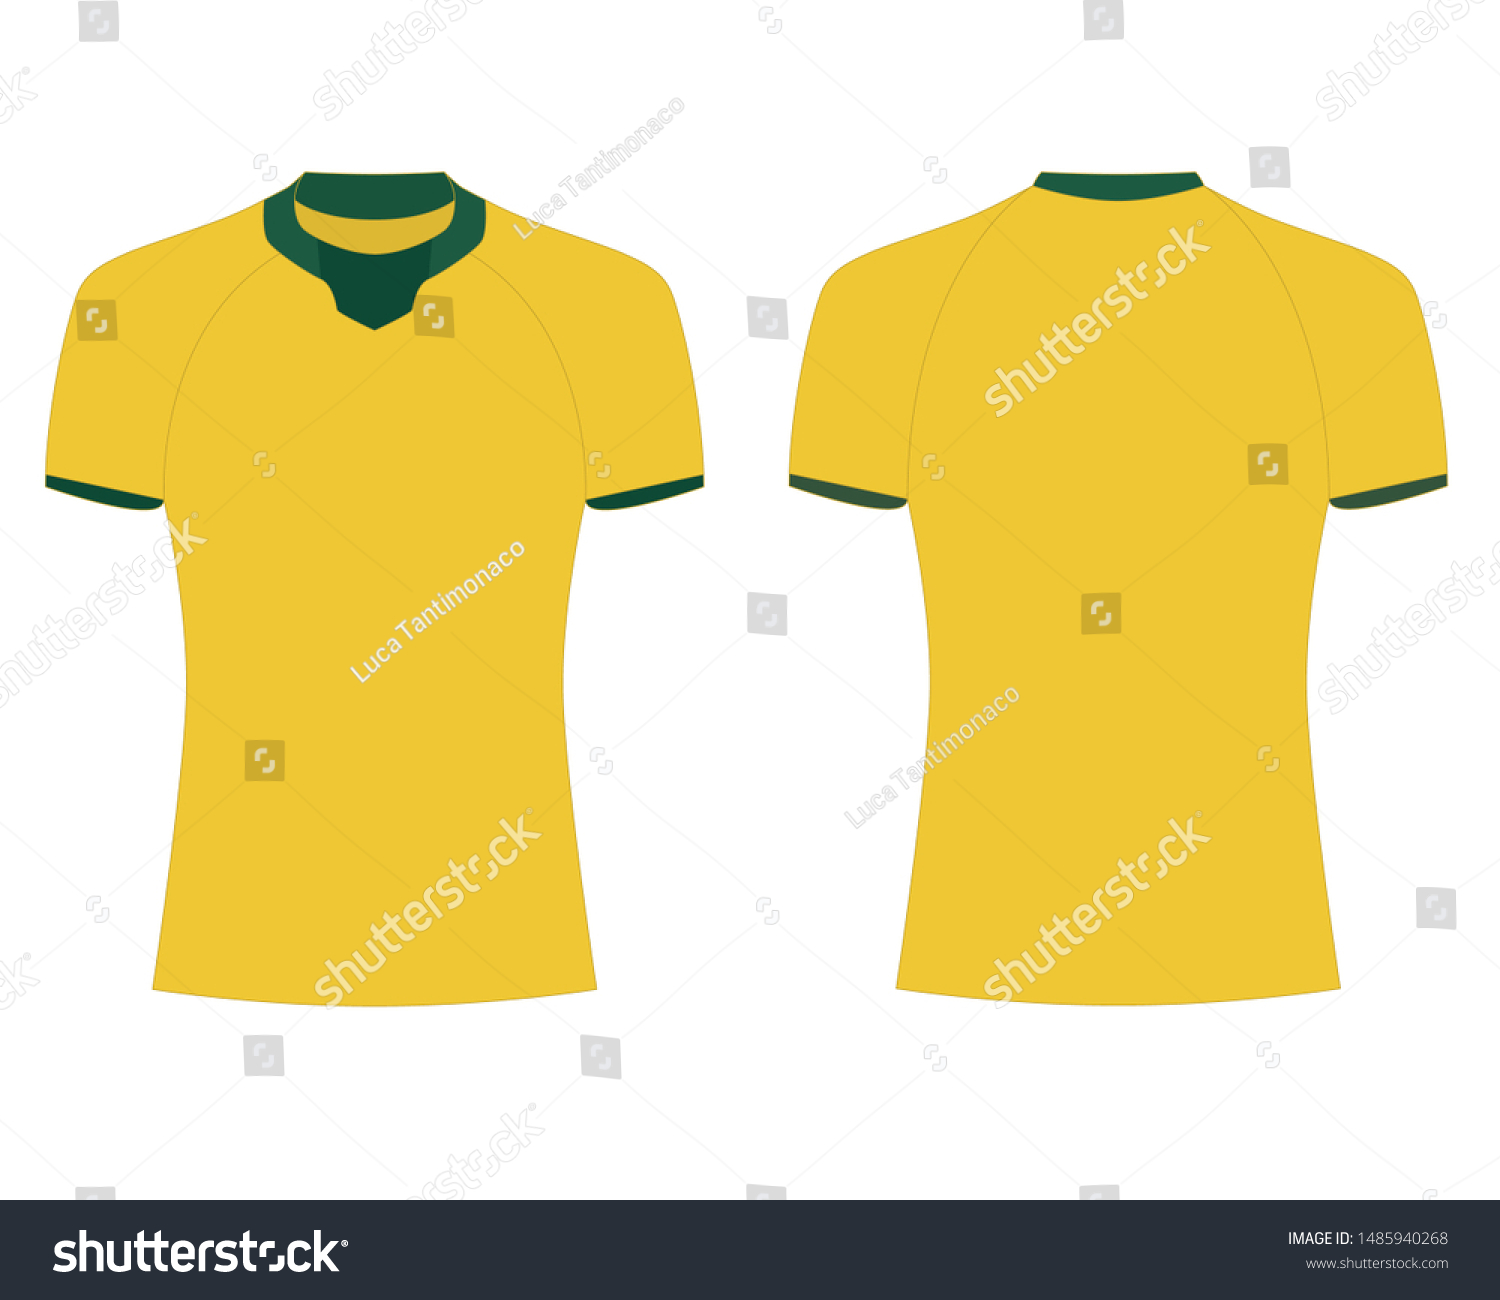 Download Tshirt Sport Design Template Rugby Jersey Stock Vector Royalty Free 1485940268